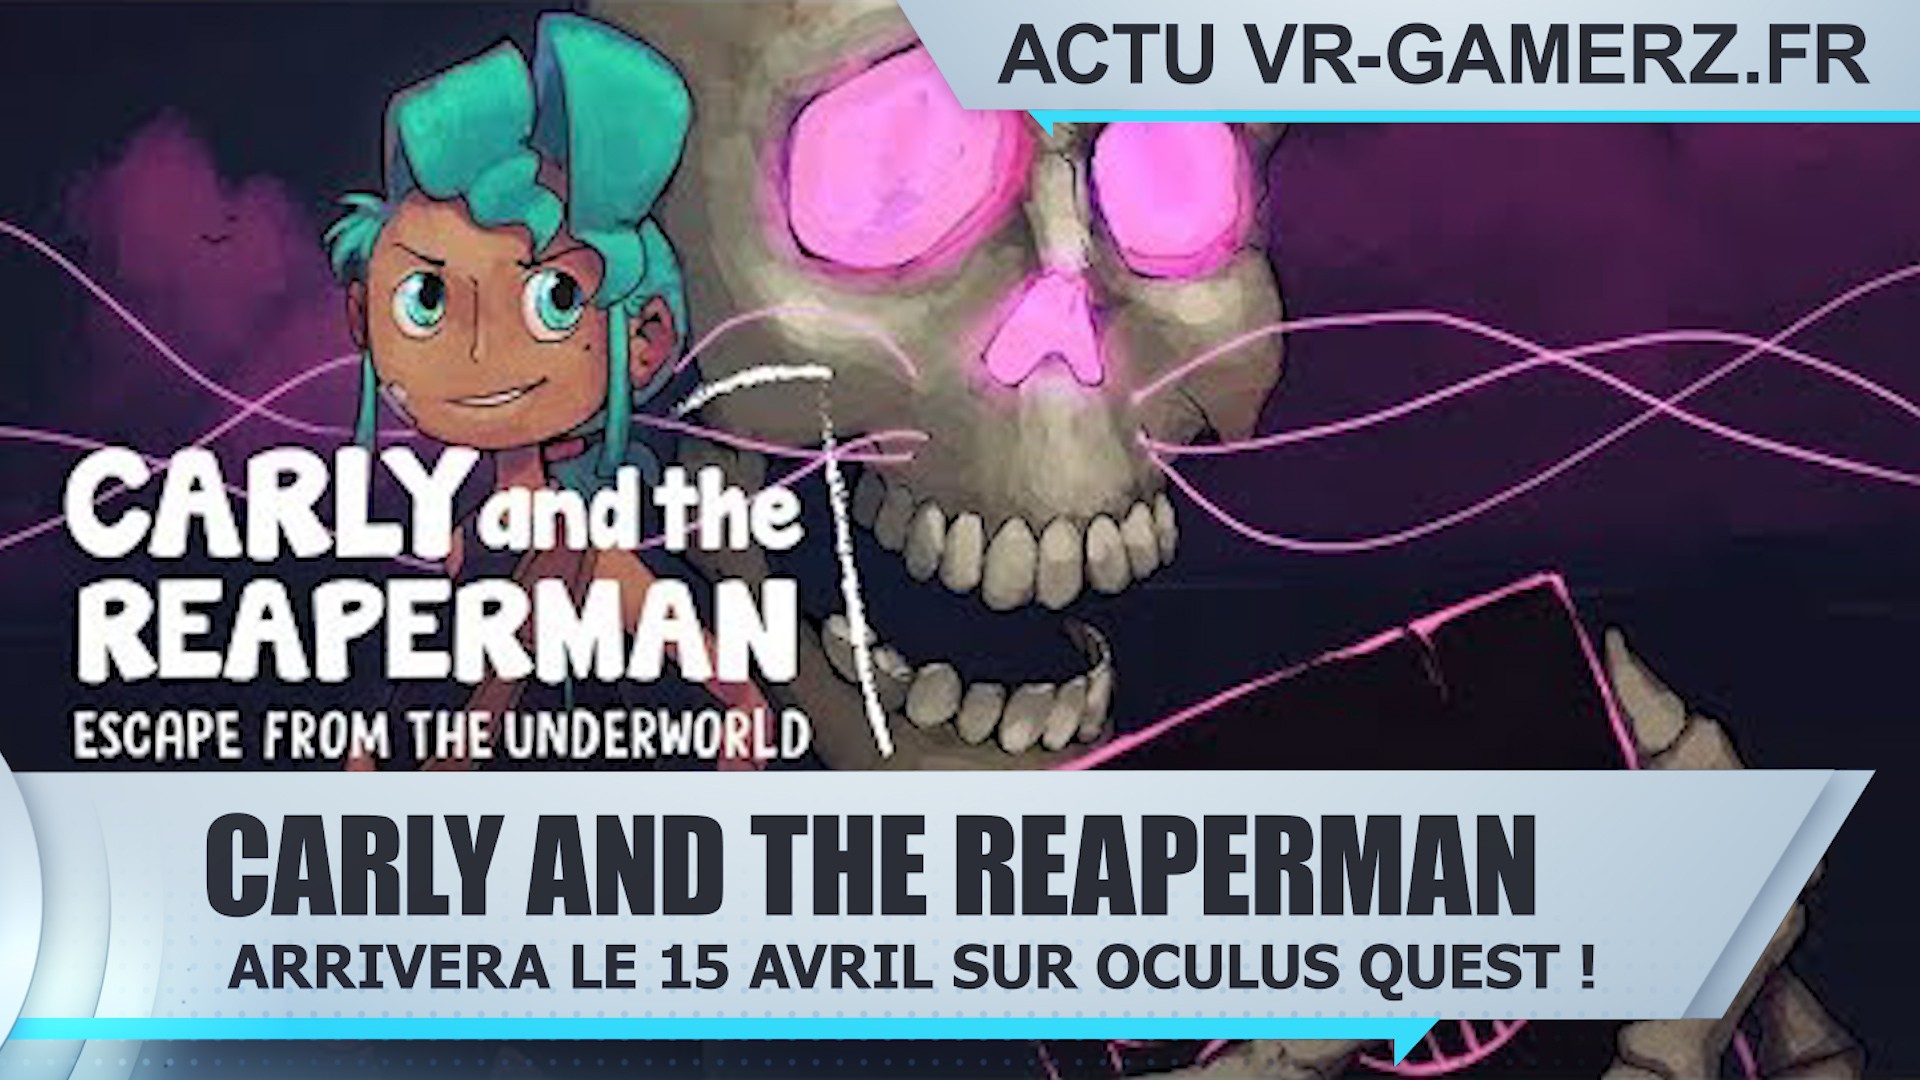 Carly and the Reaperman arrive le 15 Avril sur Oculus quest !